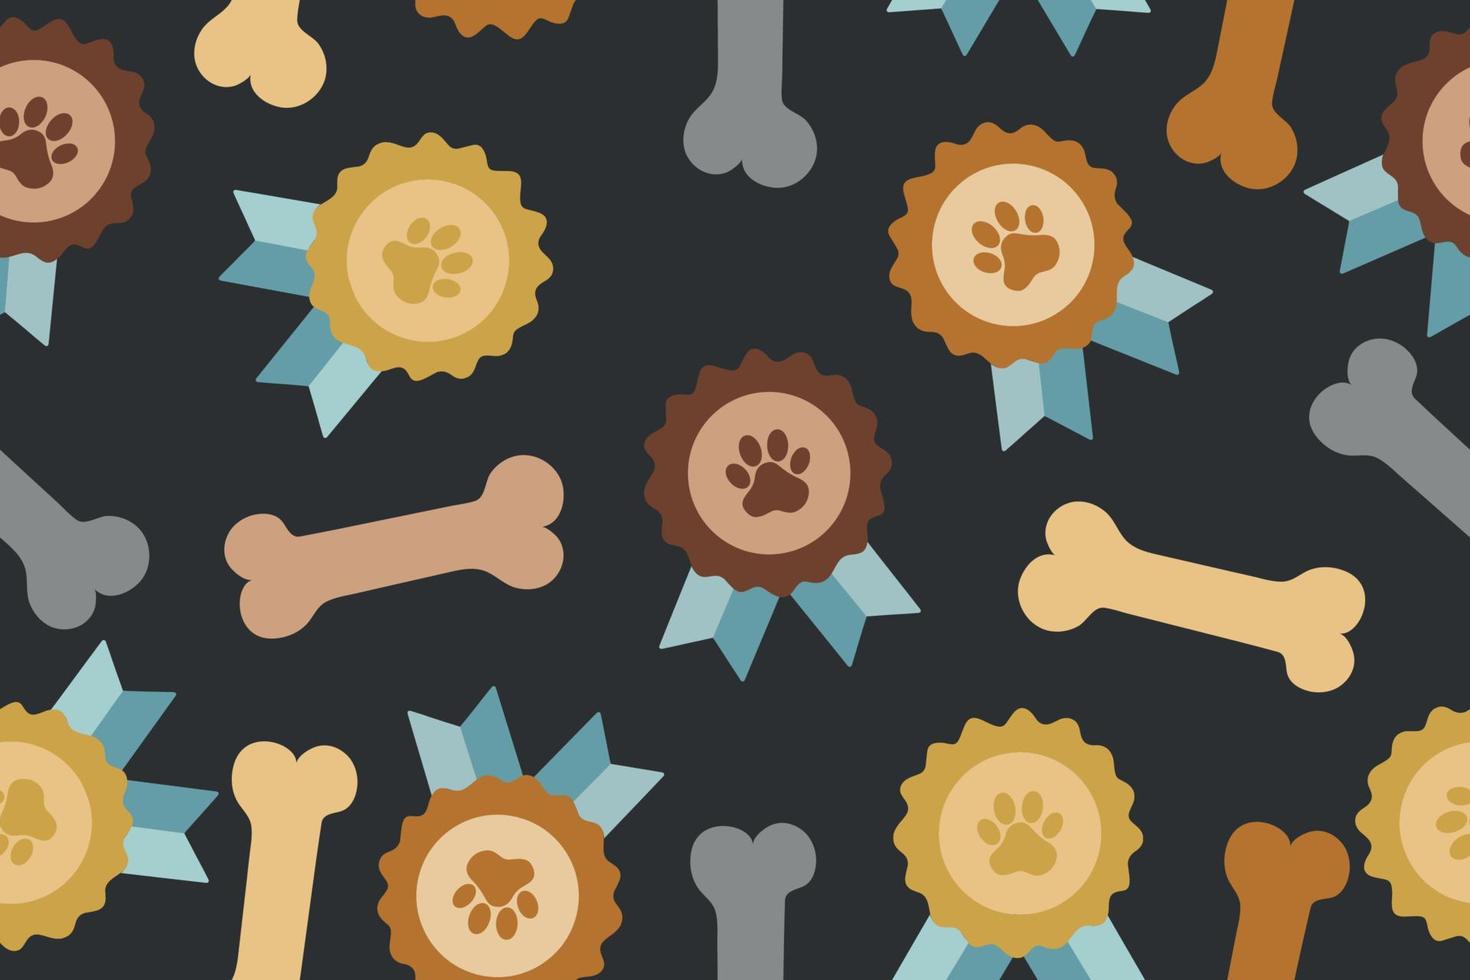 An award badge with a dog or cat paw print and a bone. Vector illustration.